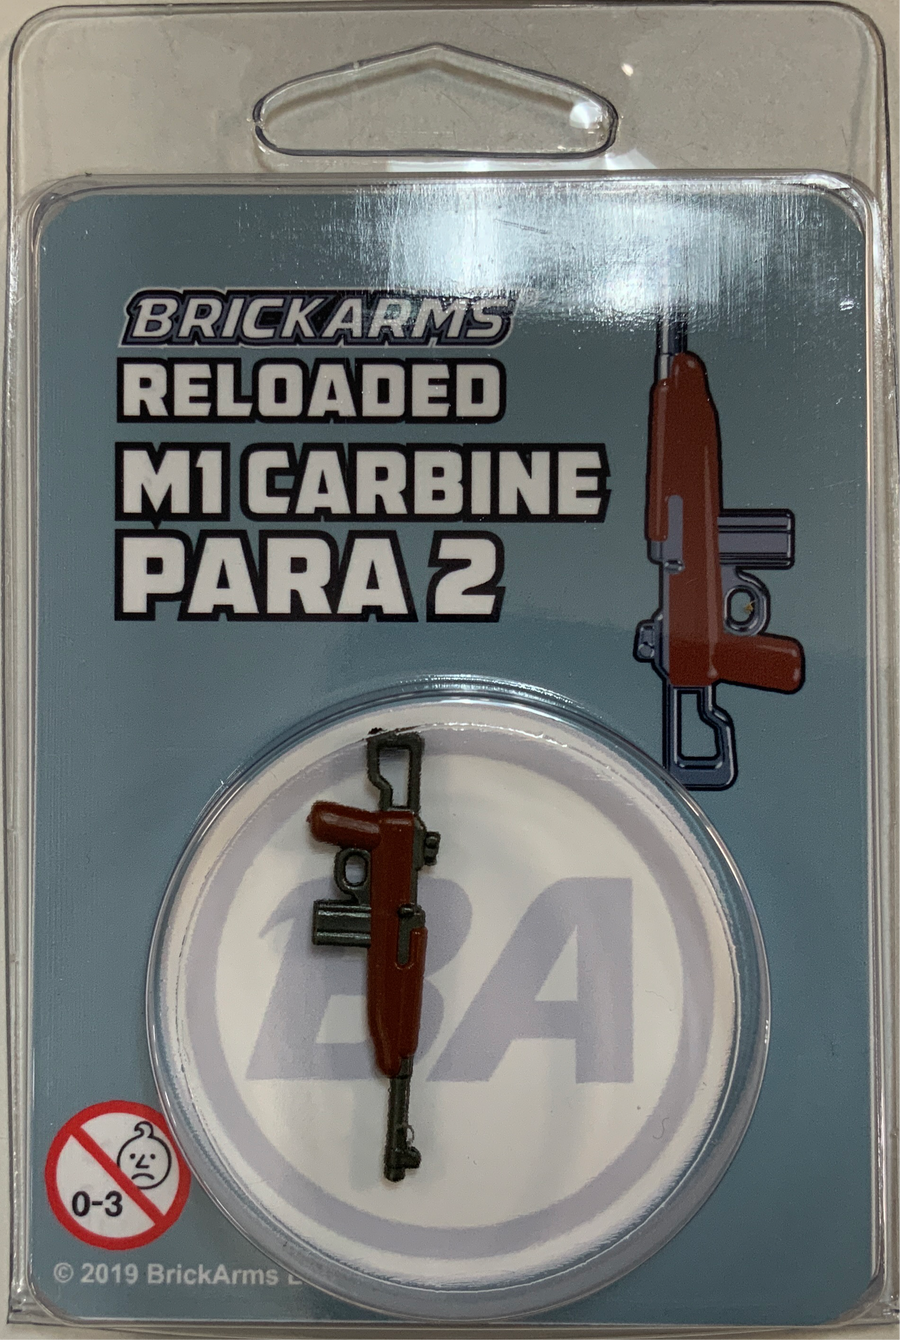 BRICKARMS M1 CARBINE PARA 2 RELOADED & Overmolded Accessories Brickarms   